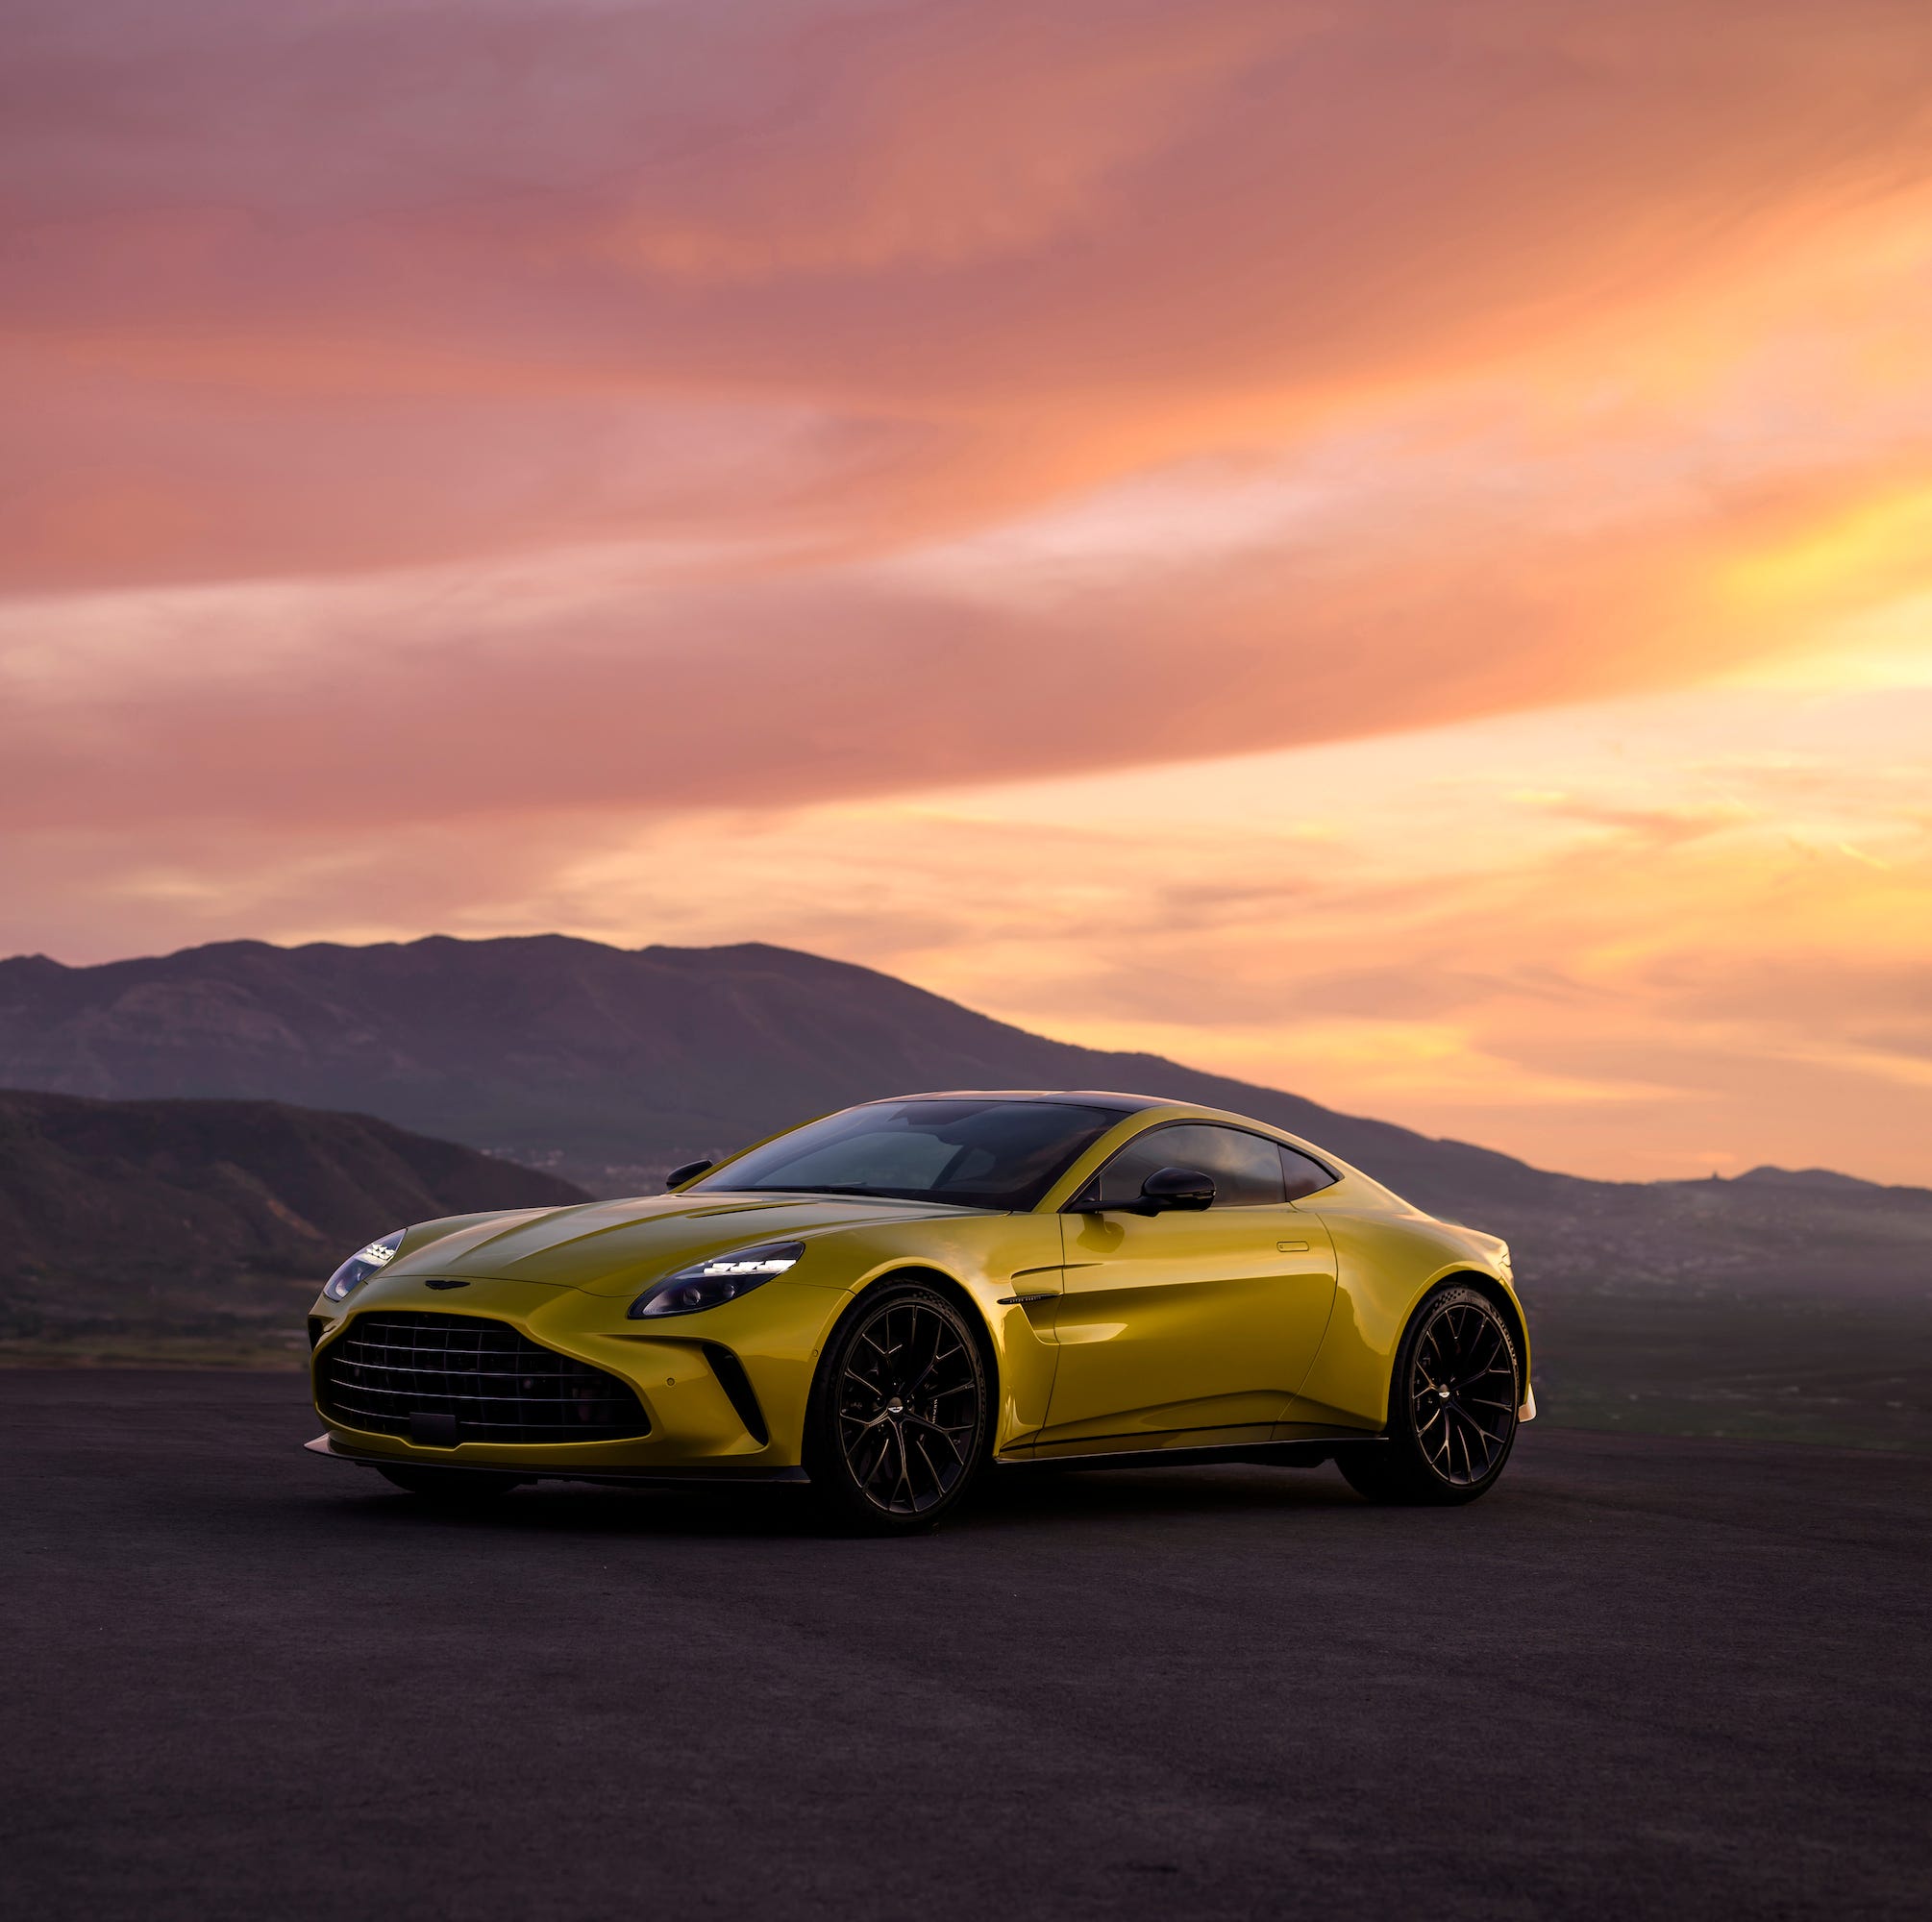 The Aston Martin Vantage Is Beautiful Once More